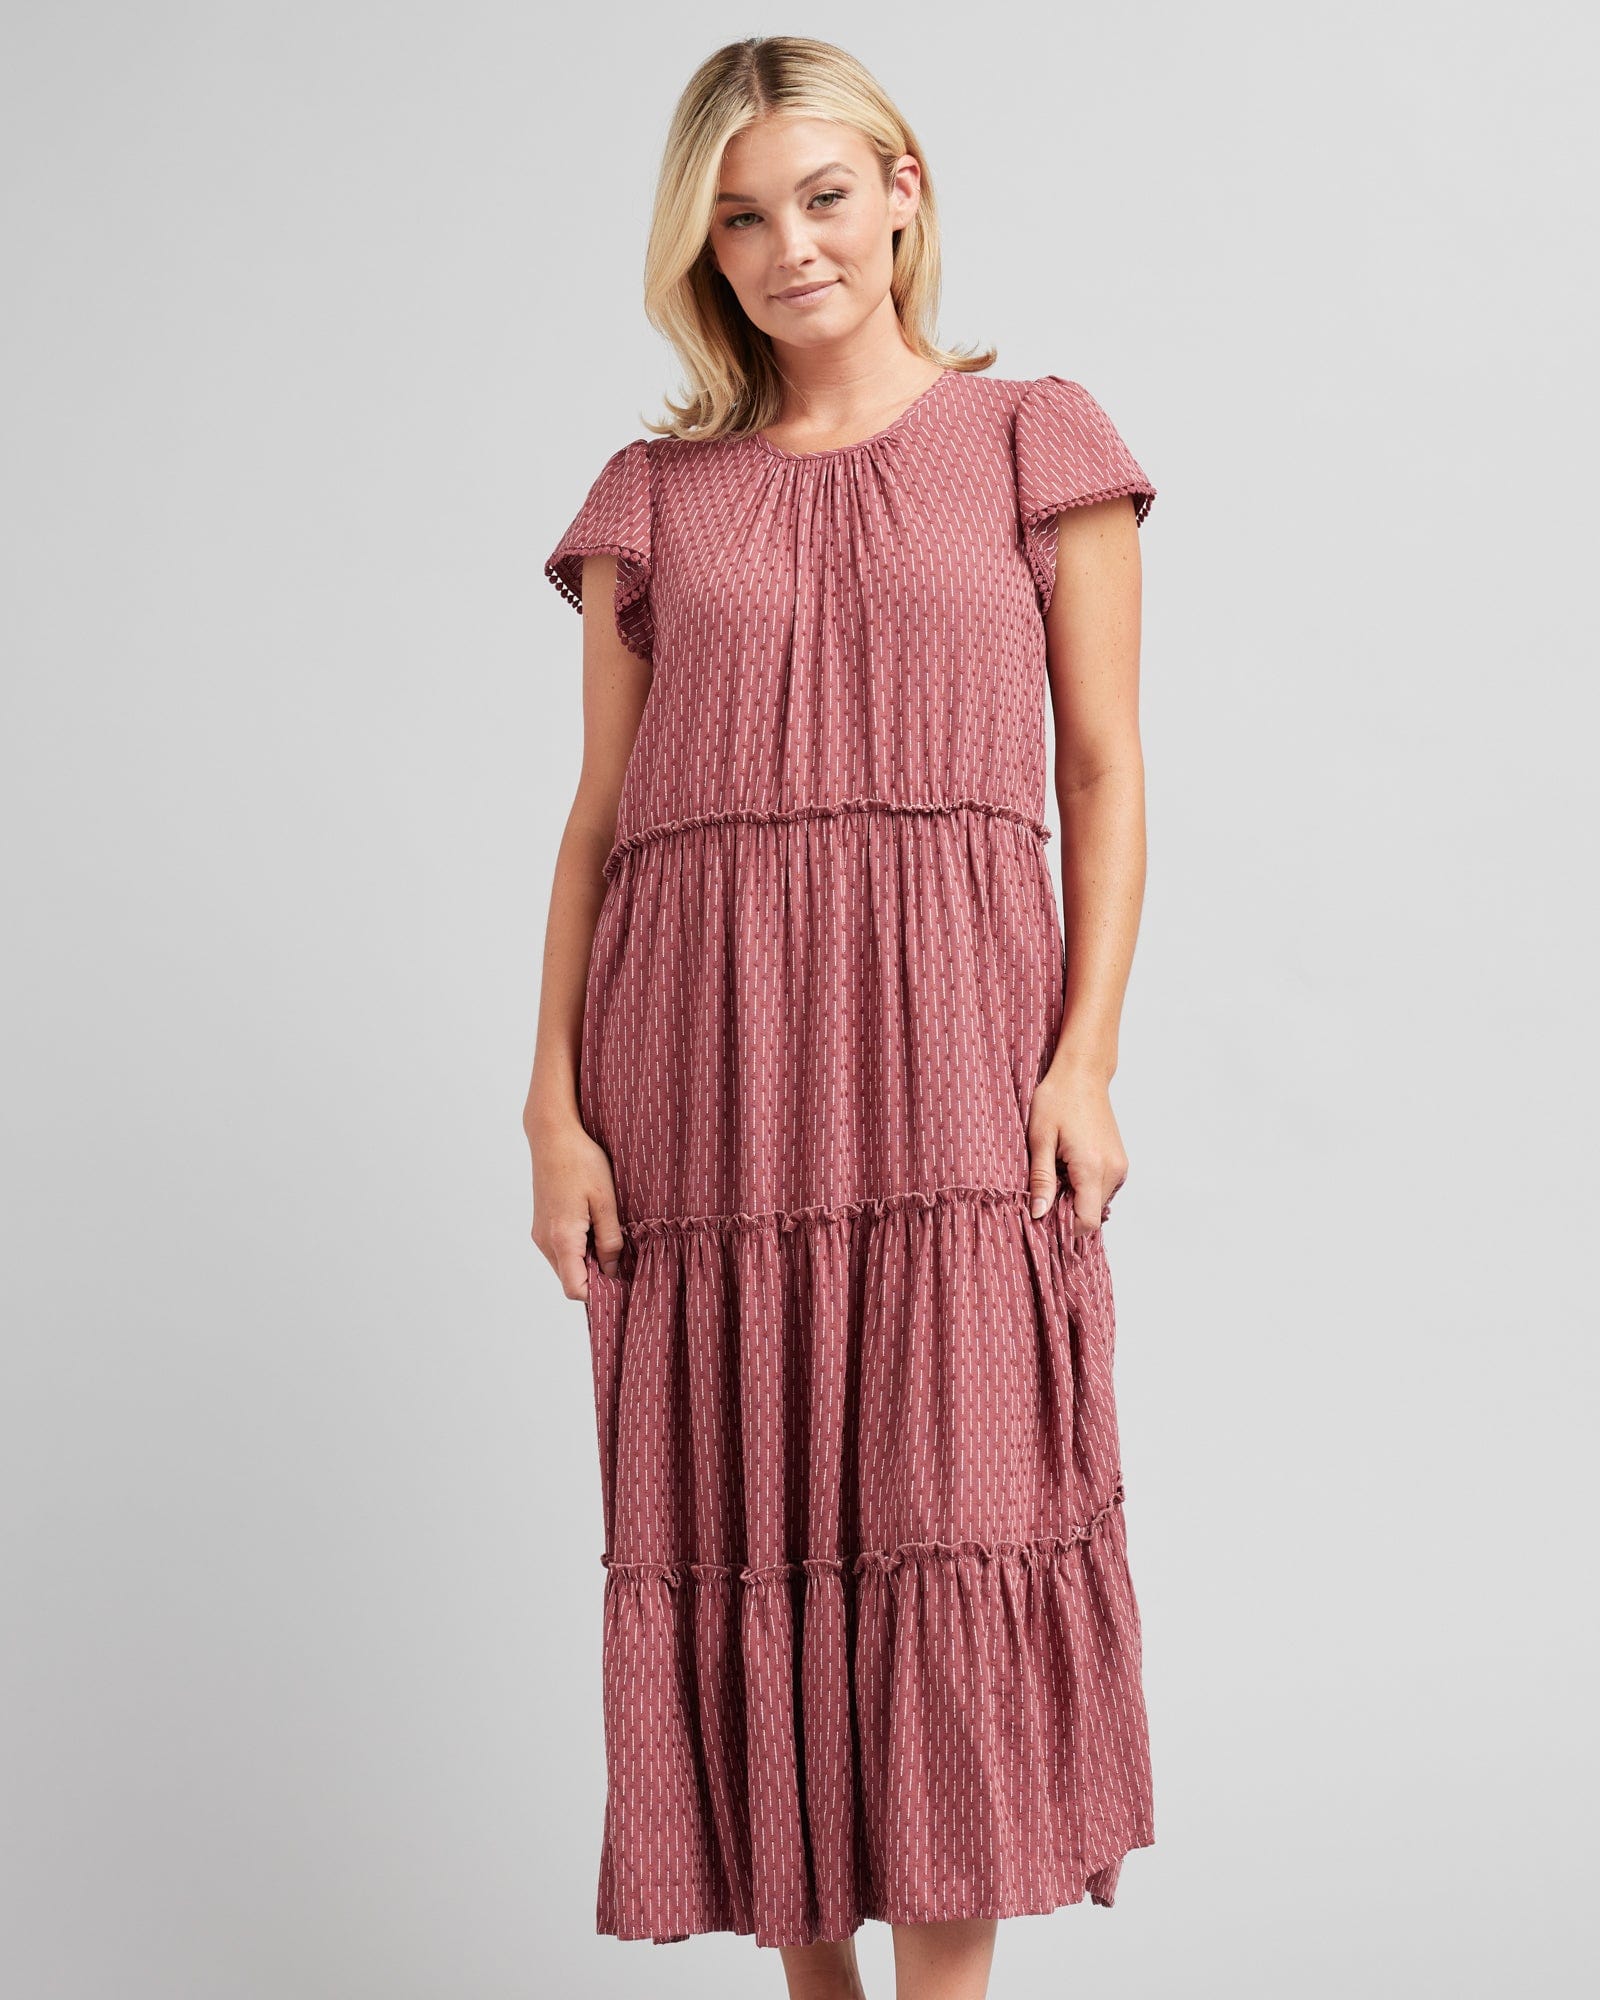 Woman in a short sleeve, midi-length, tiered skirt, pink dress